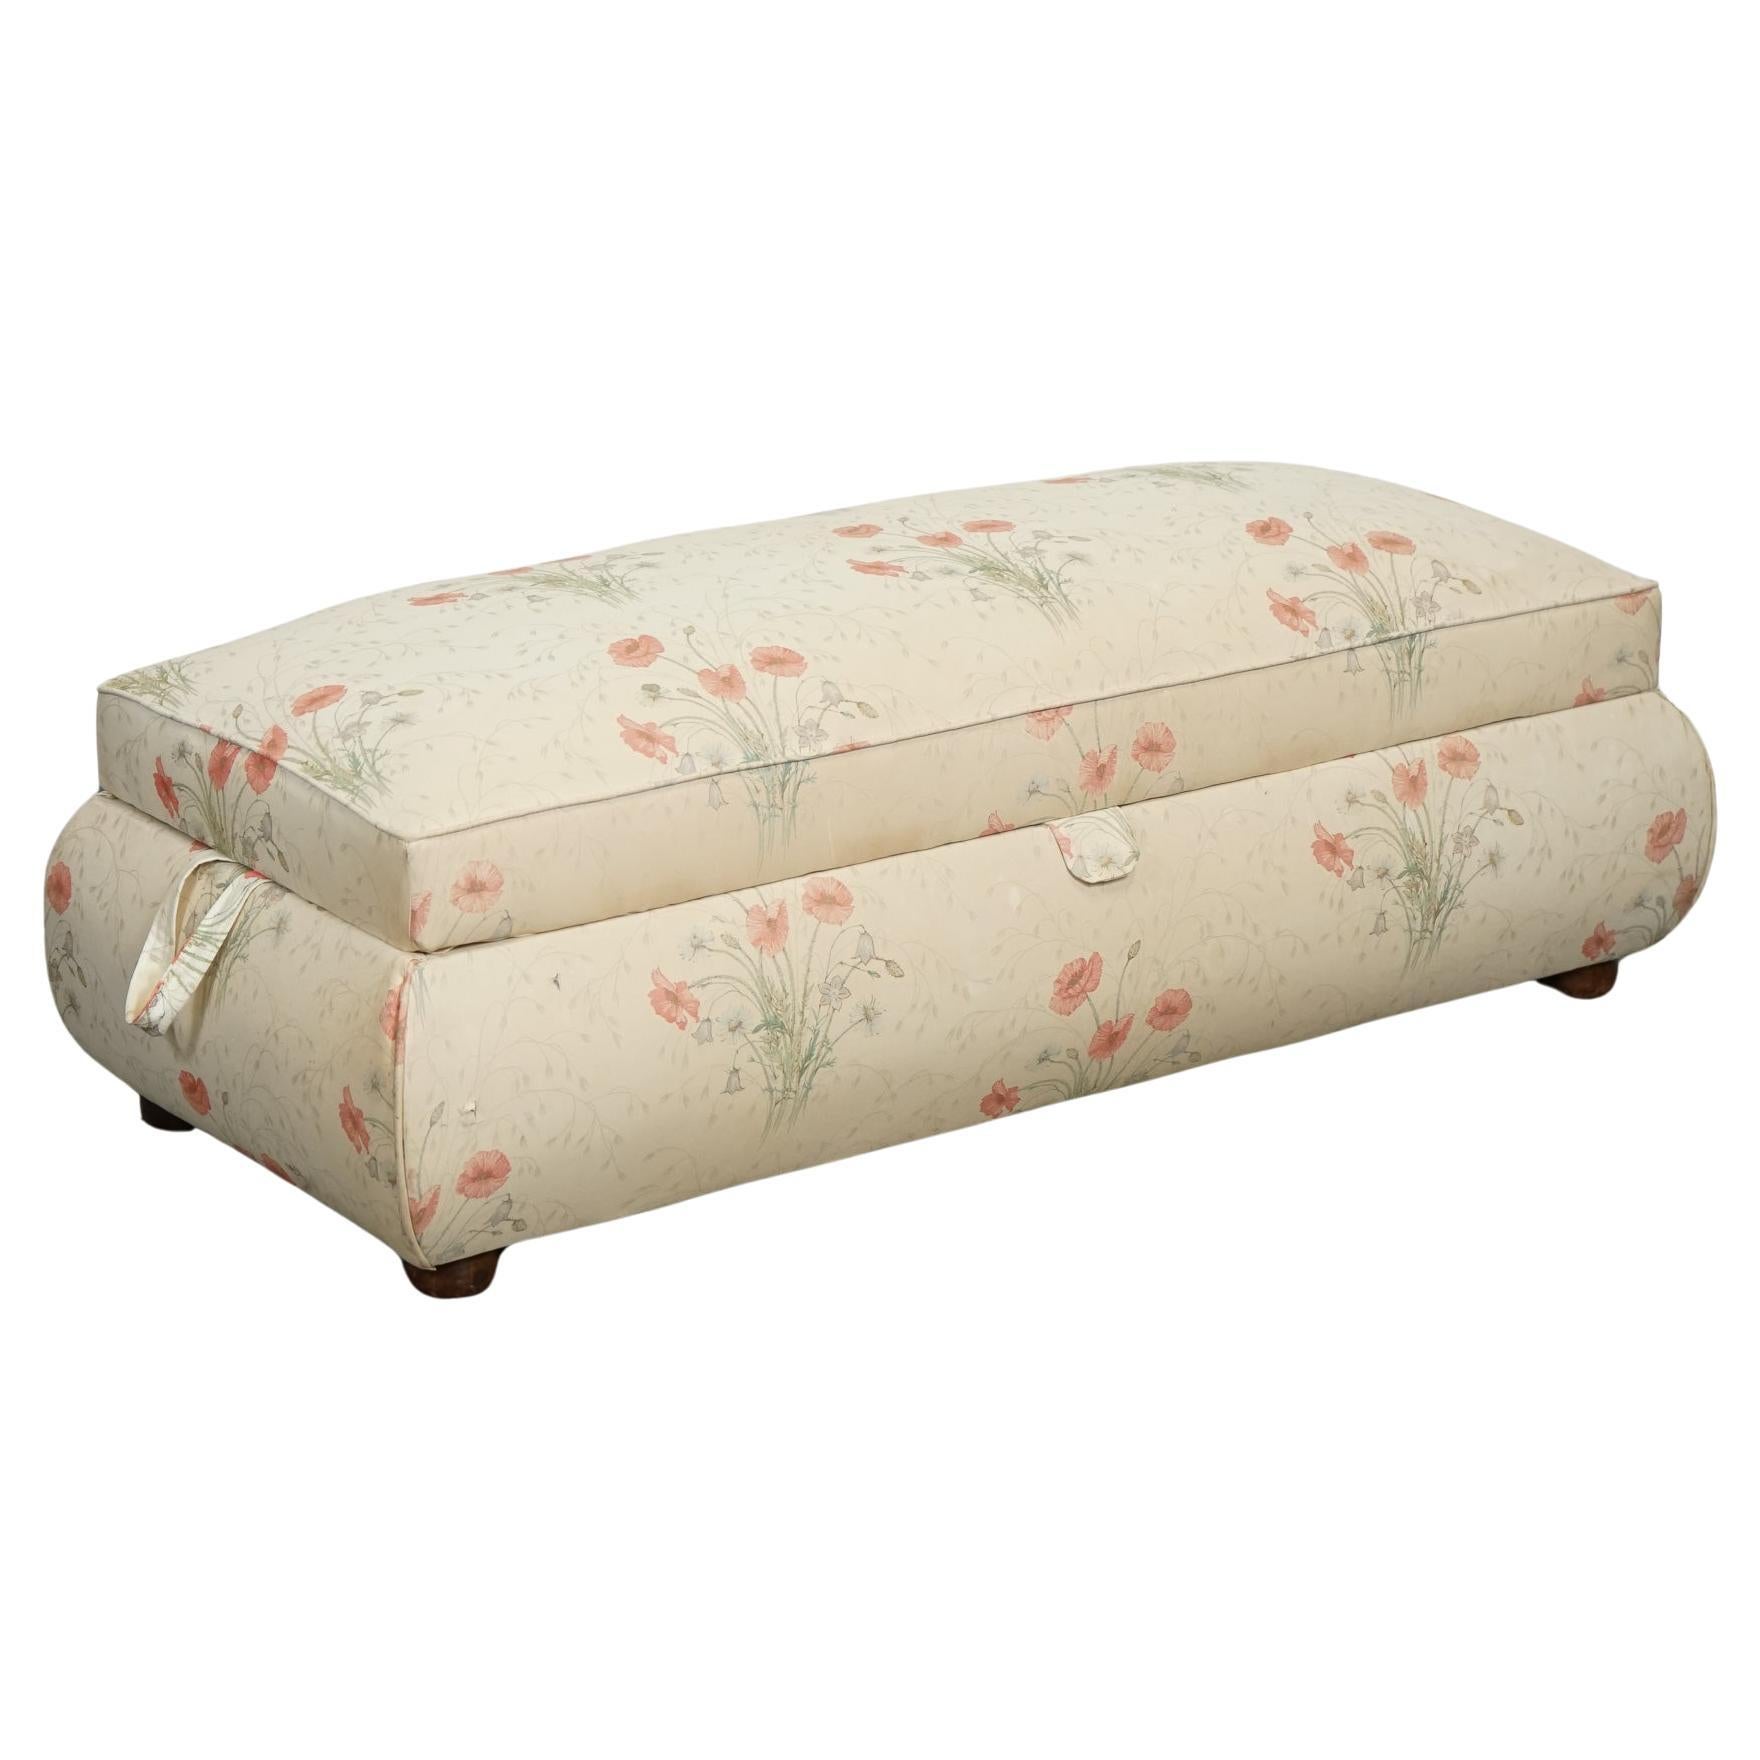 LARGE ANTIQUE VICTORIAN POPPY FLOWER PATTERN FABRiC OTTOMAN CHEST TRUNK  J1 For Sale